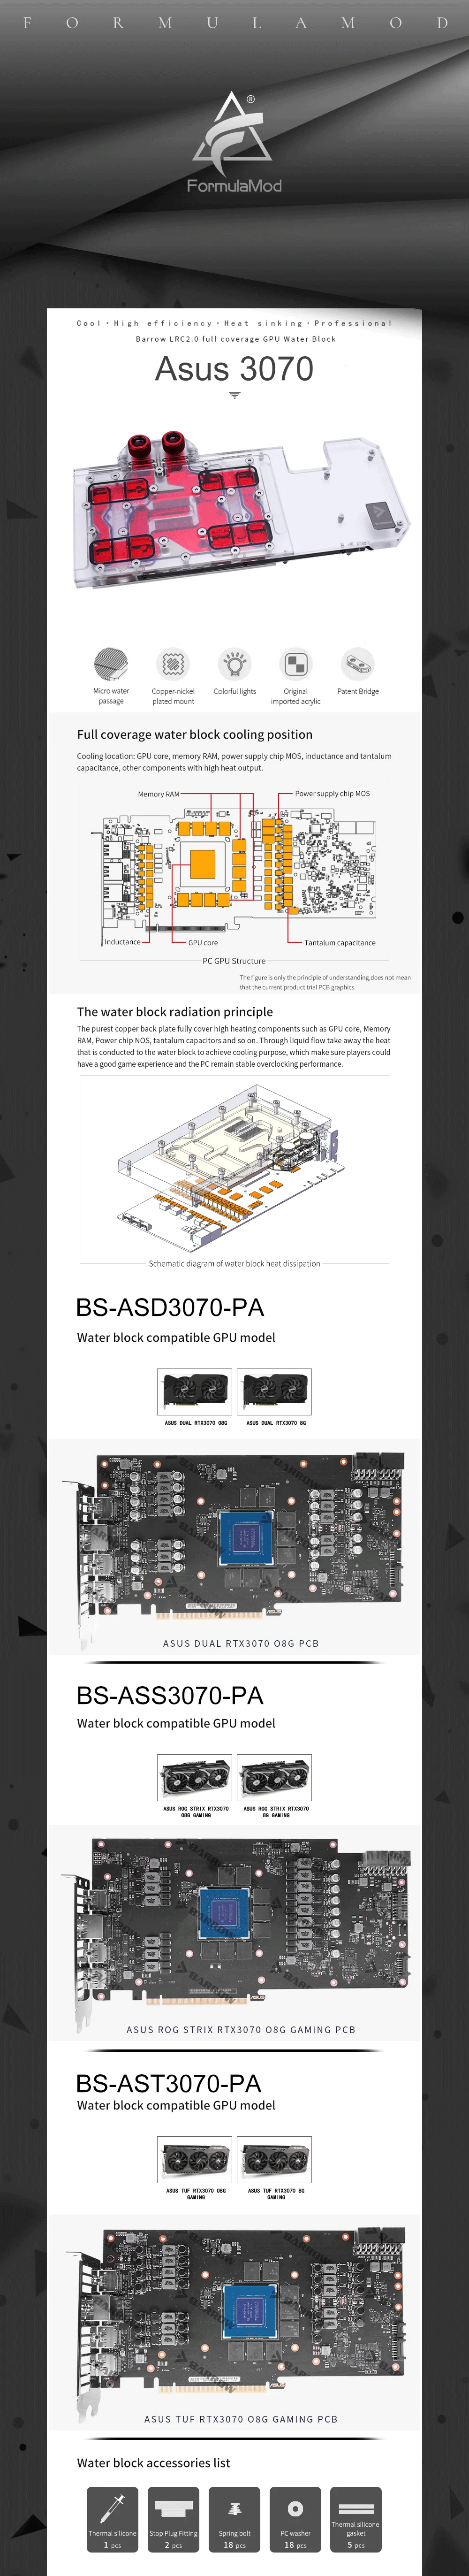 Barrow 3070 GPU Water Cooling Block For ASUS RTX3070 Graphics Card , Full Cover A-RGB Cooler, BS-ASS3070-PA BS-ADS3070-PA  